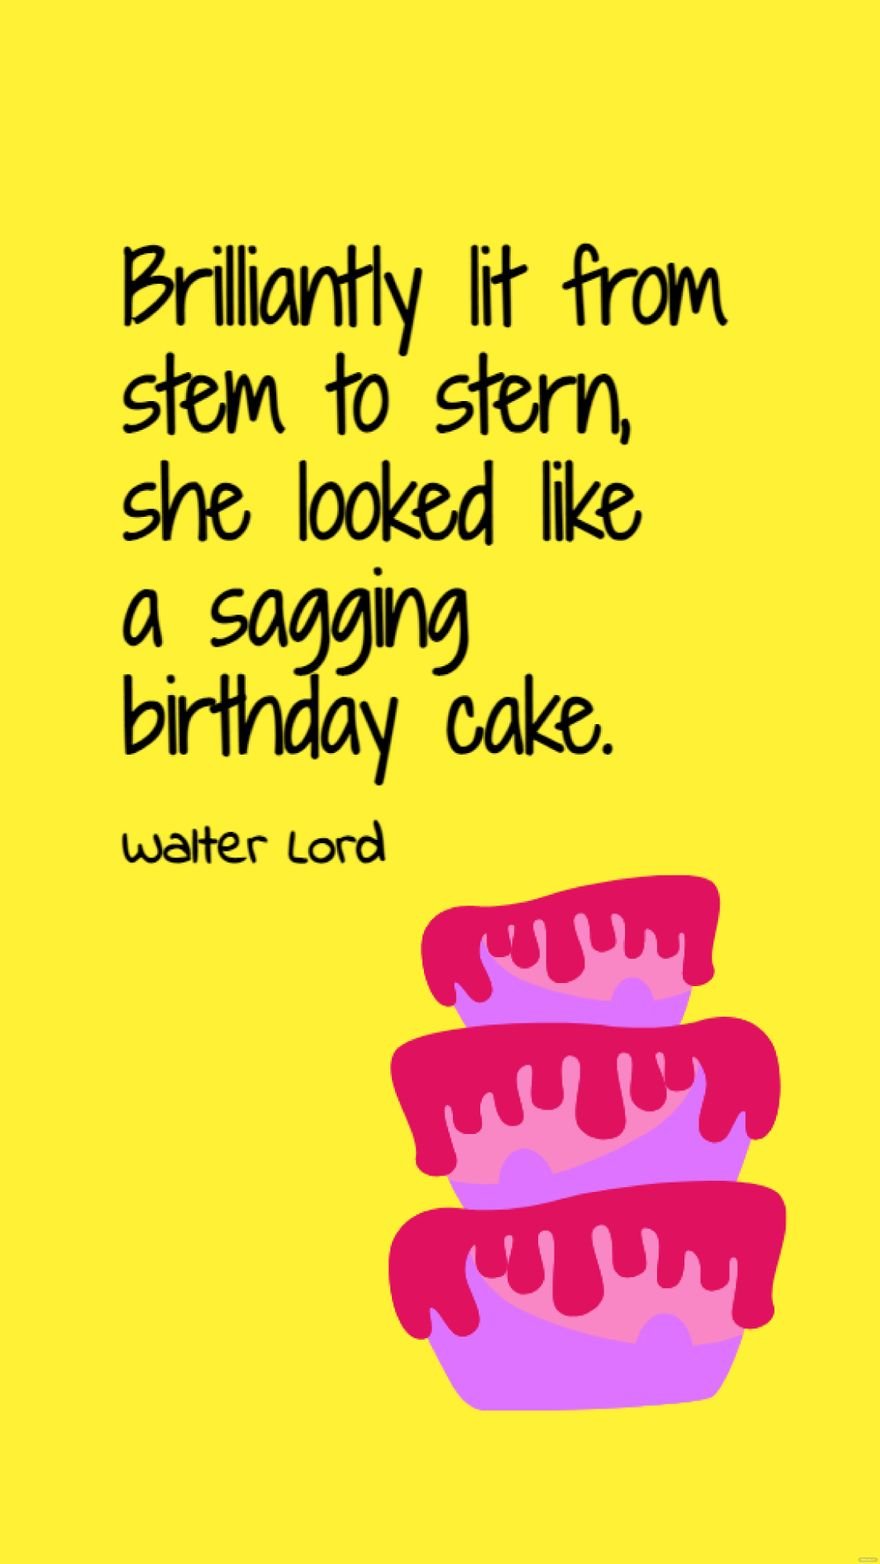 Walter Lord - Brilliantly lit from stem to stern, she looked like a sagging birthday cake. in JPG